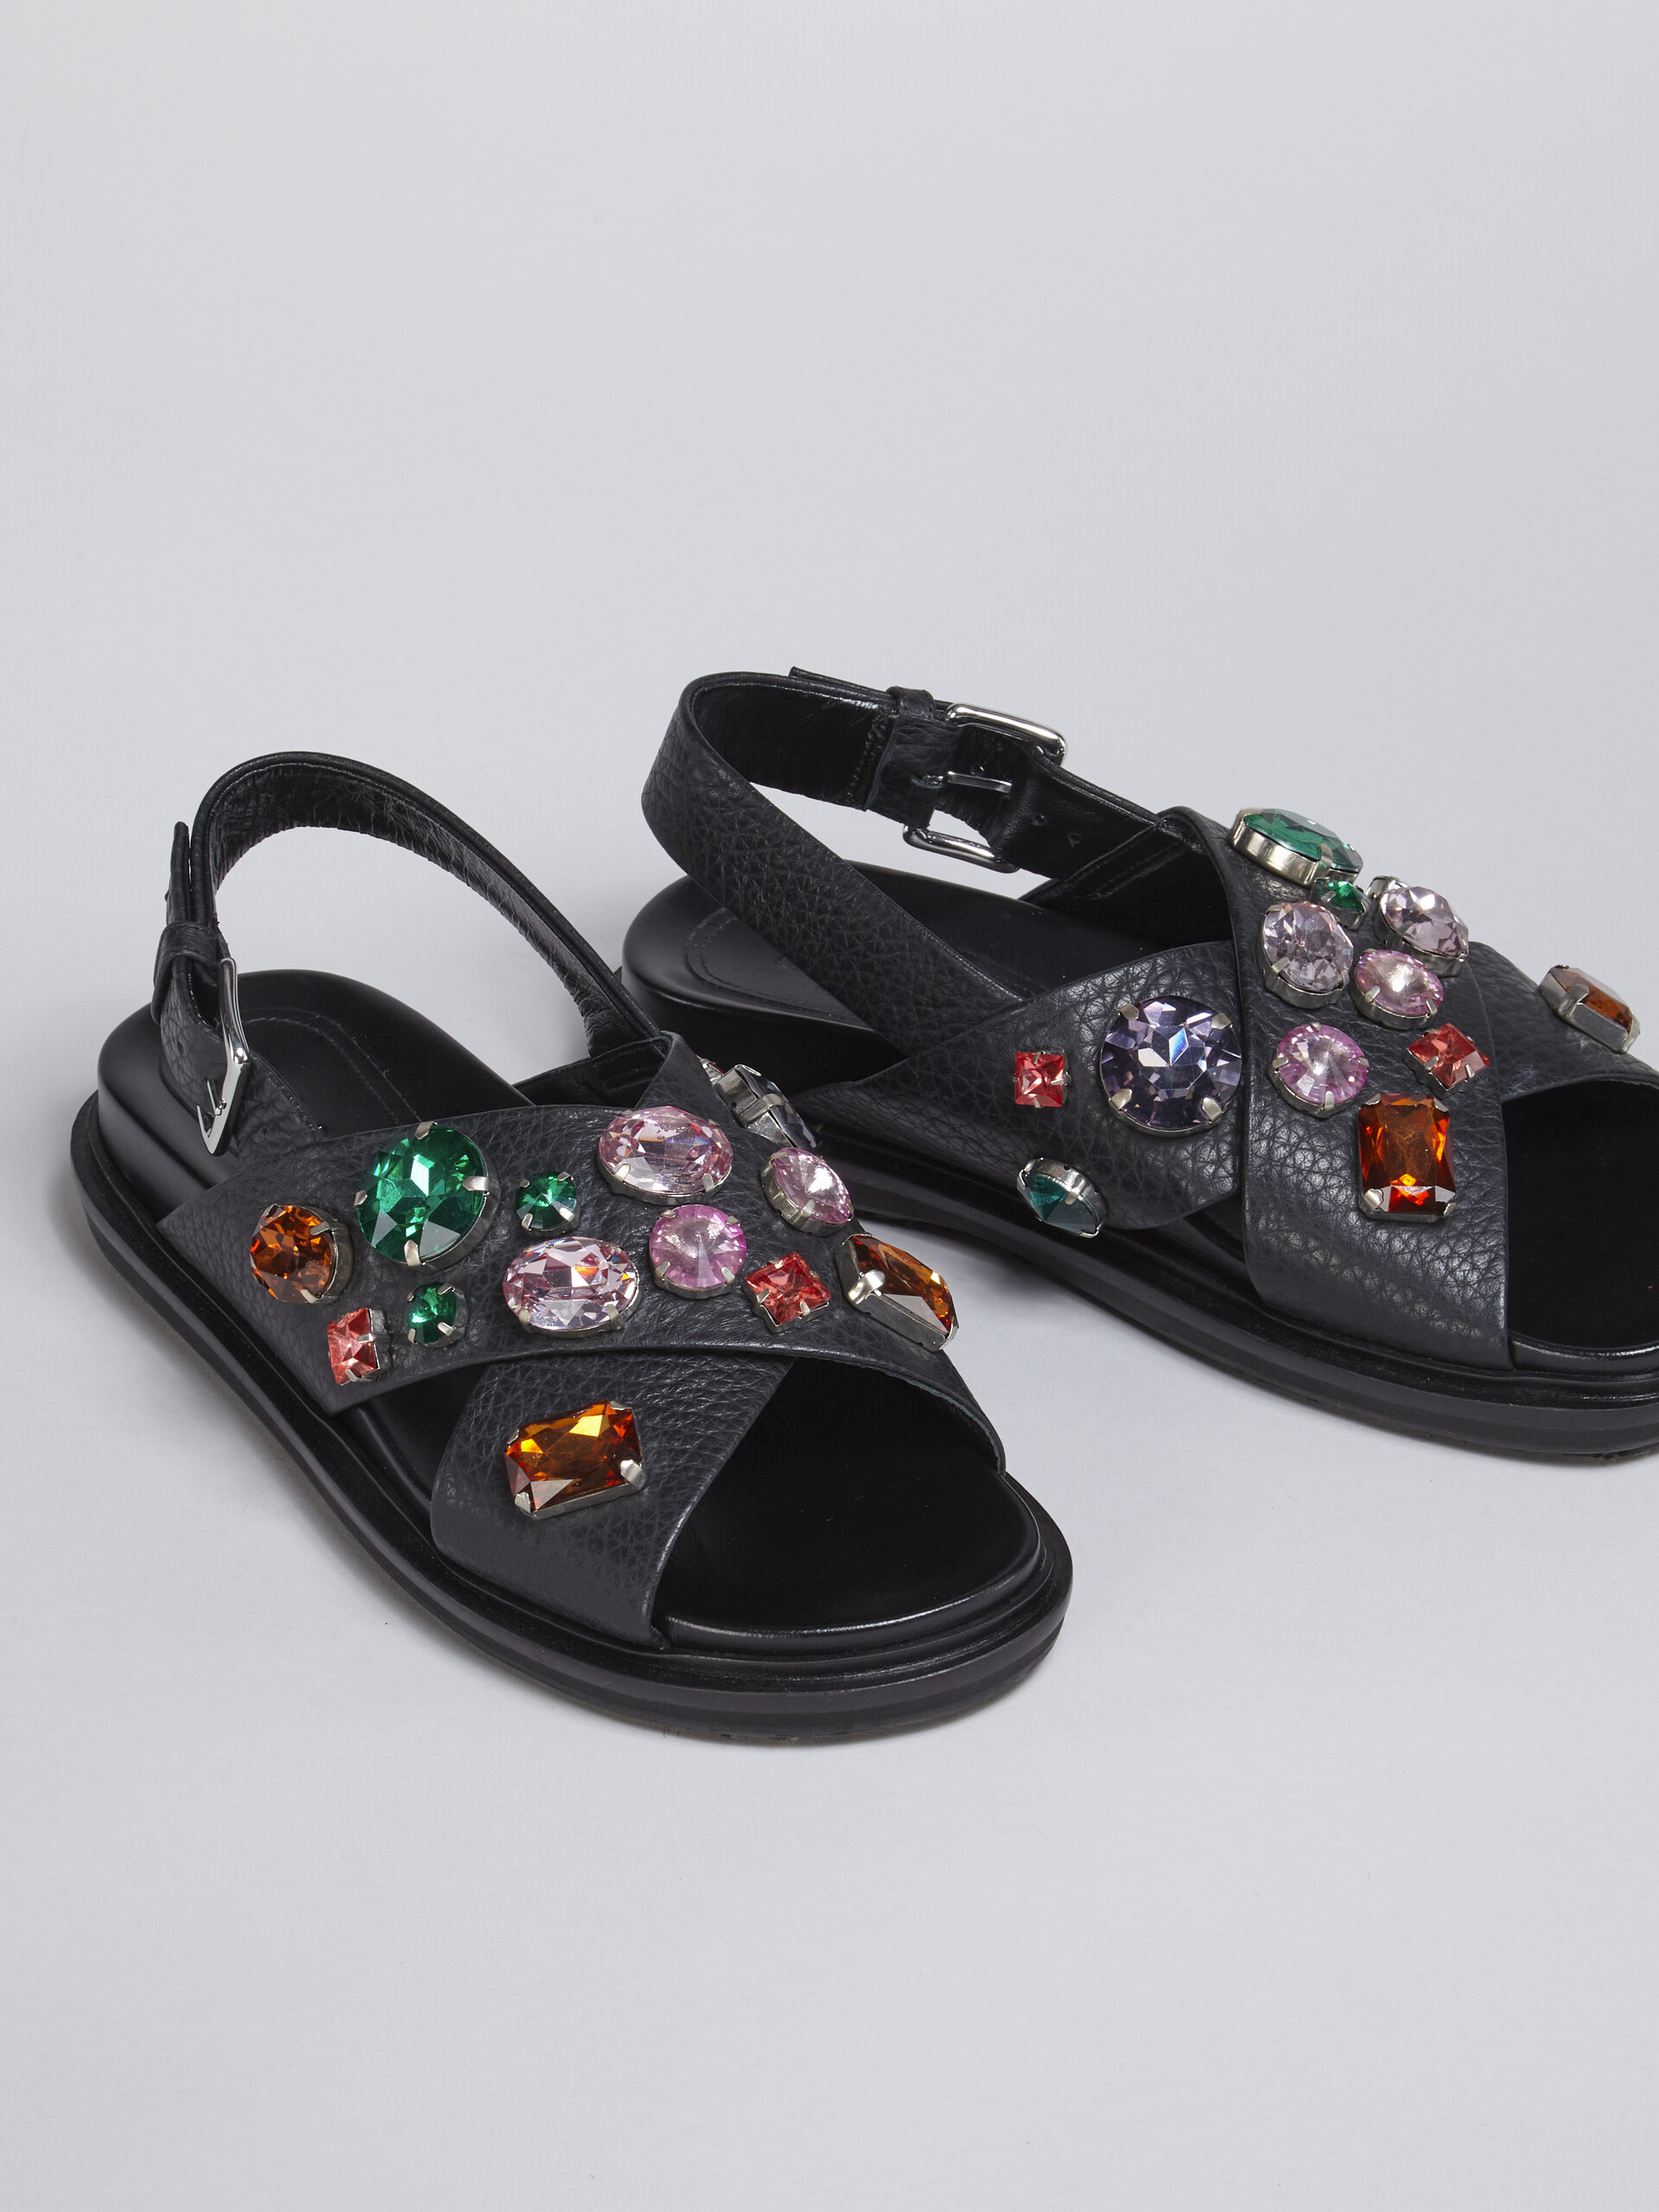 Glass beads grained leather fussbett - Sandals - Image 5